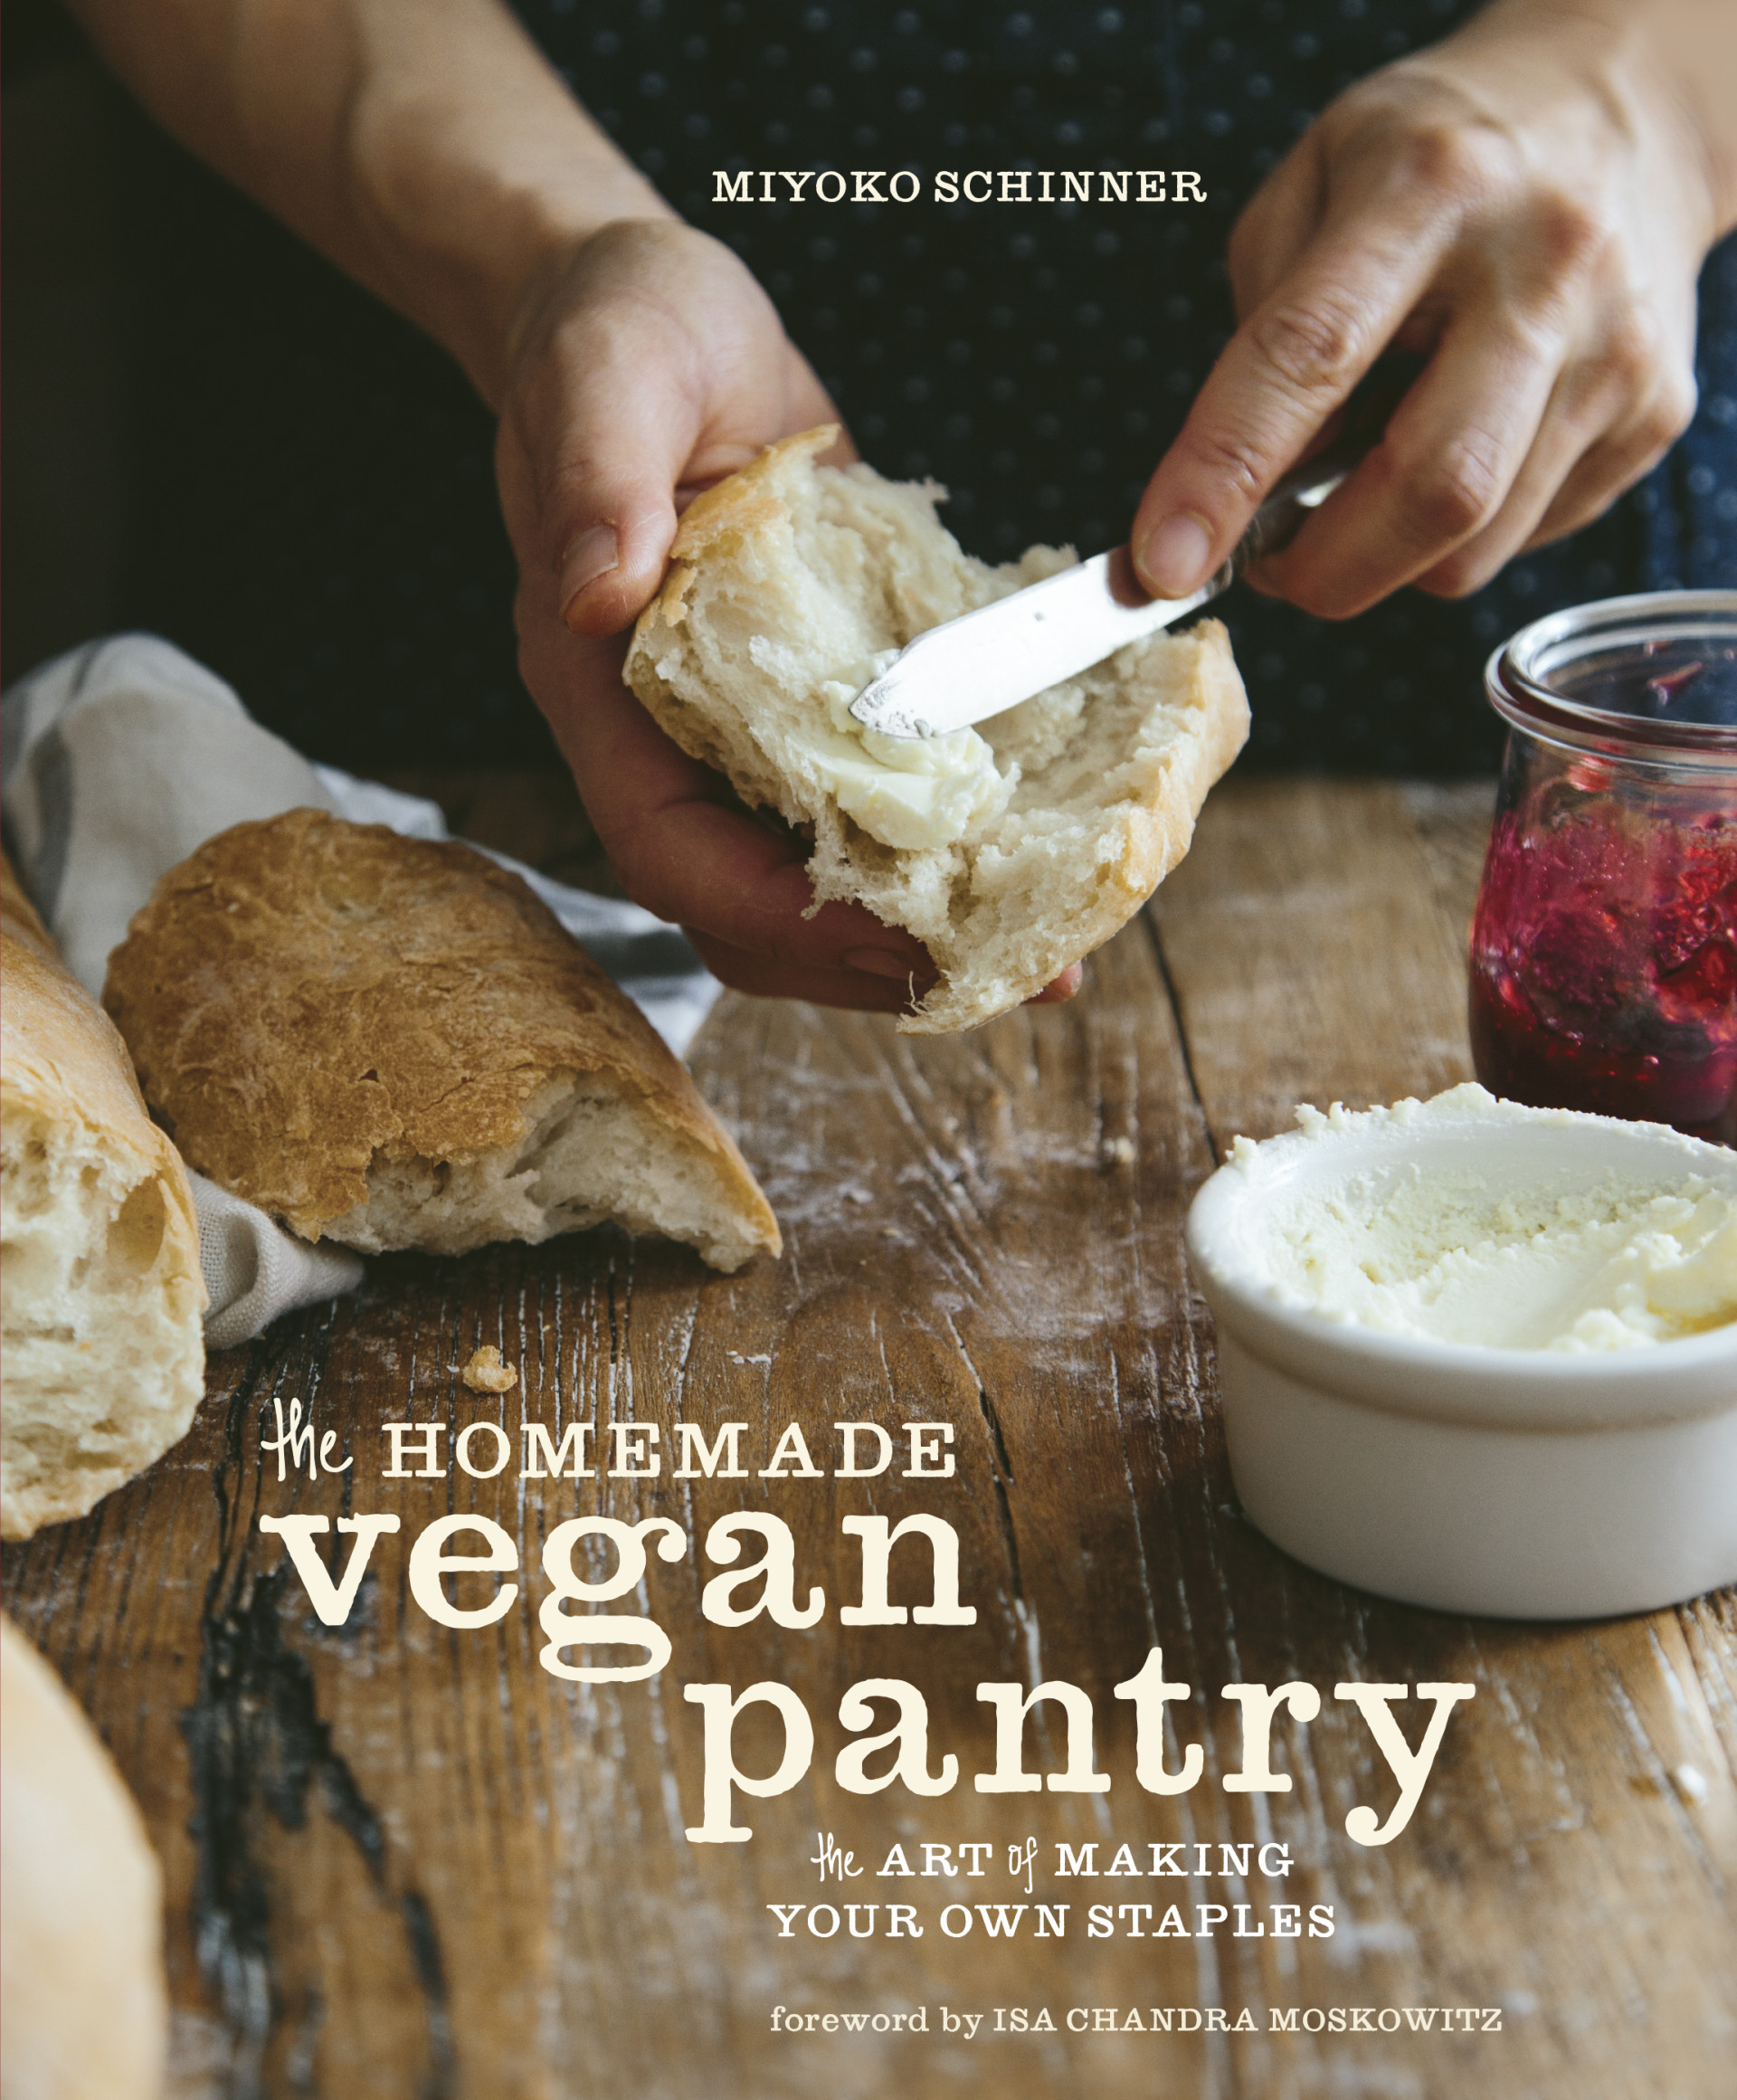 The Homemade Vegan Pantry Offers Recipes for Everything from Condiments to Pancake Mixes to Meat Substitutes.